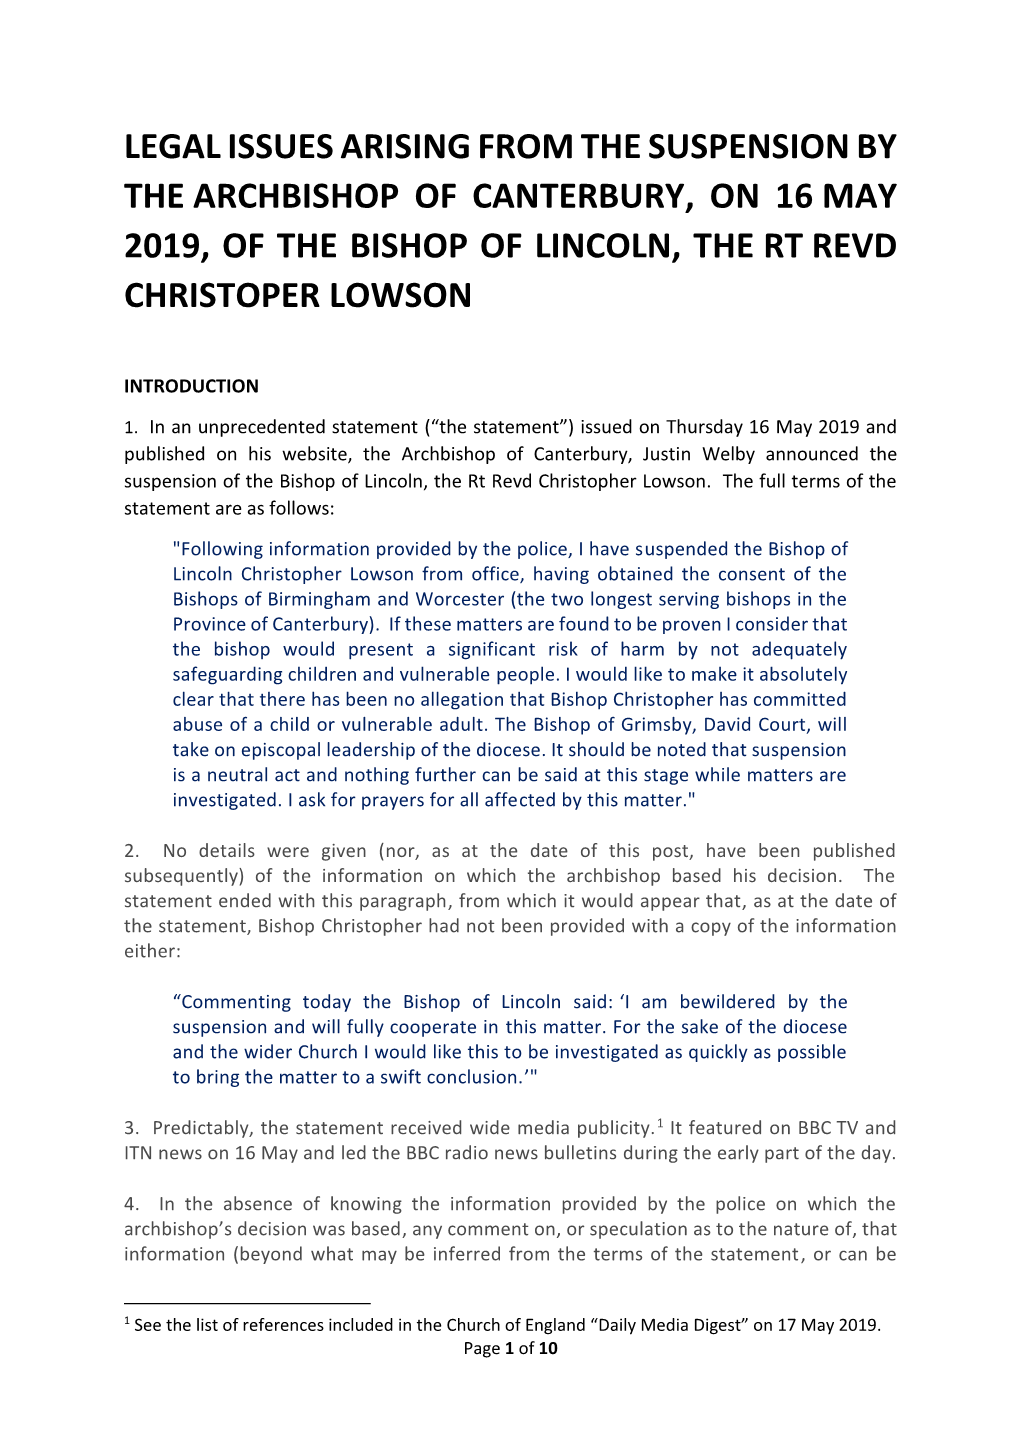 Suspension of Bishop of Lincoln